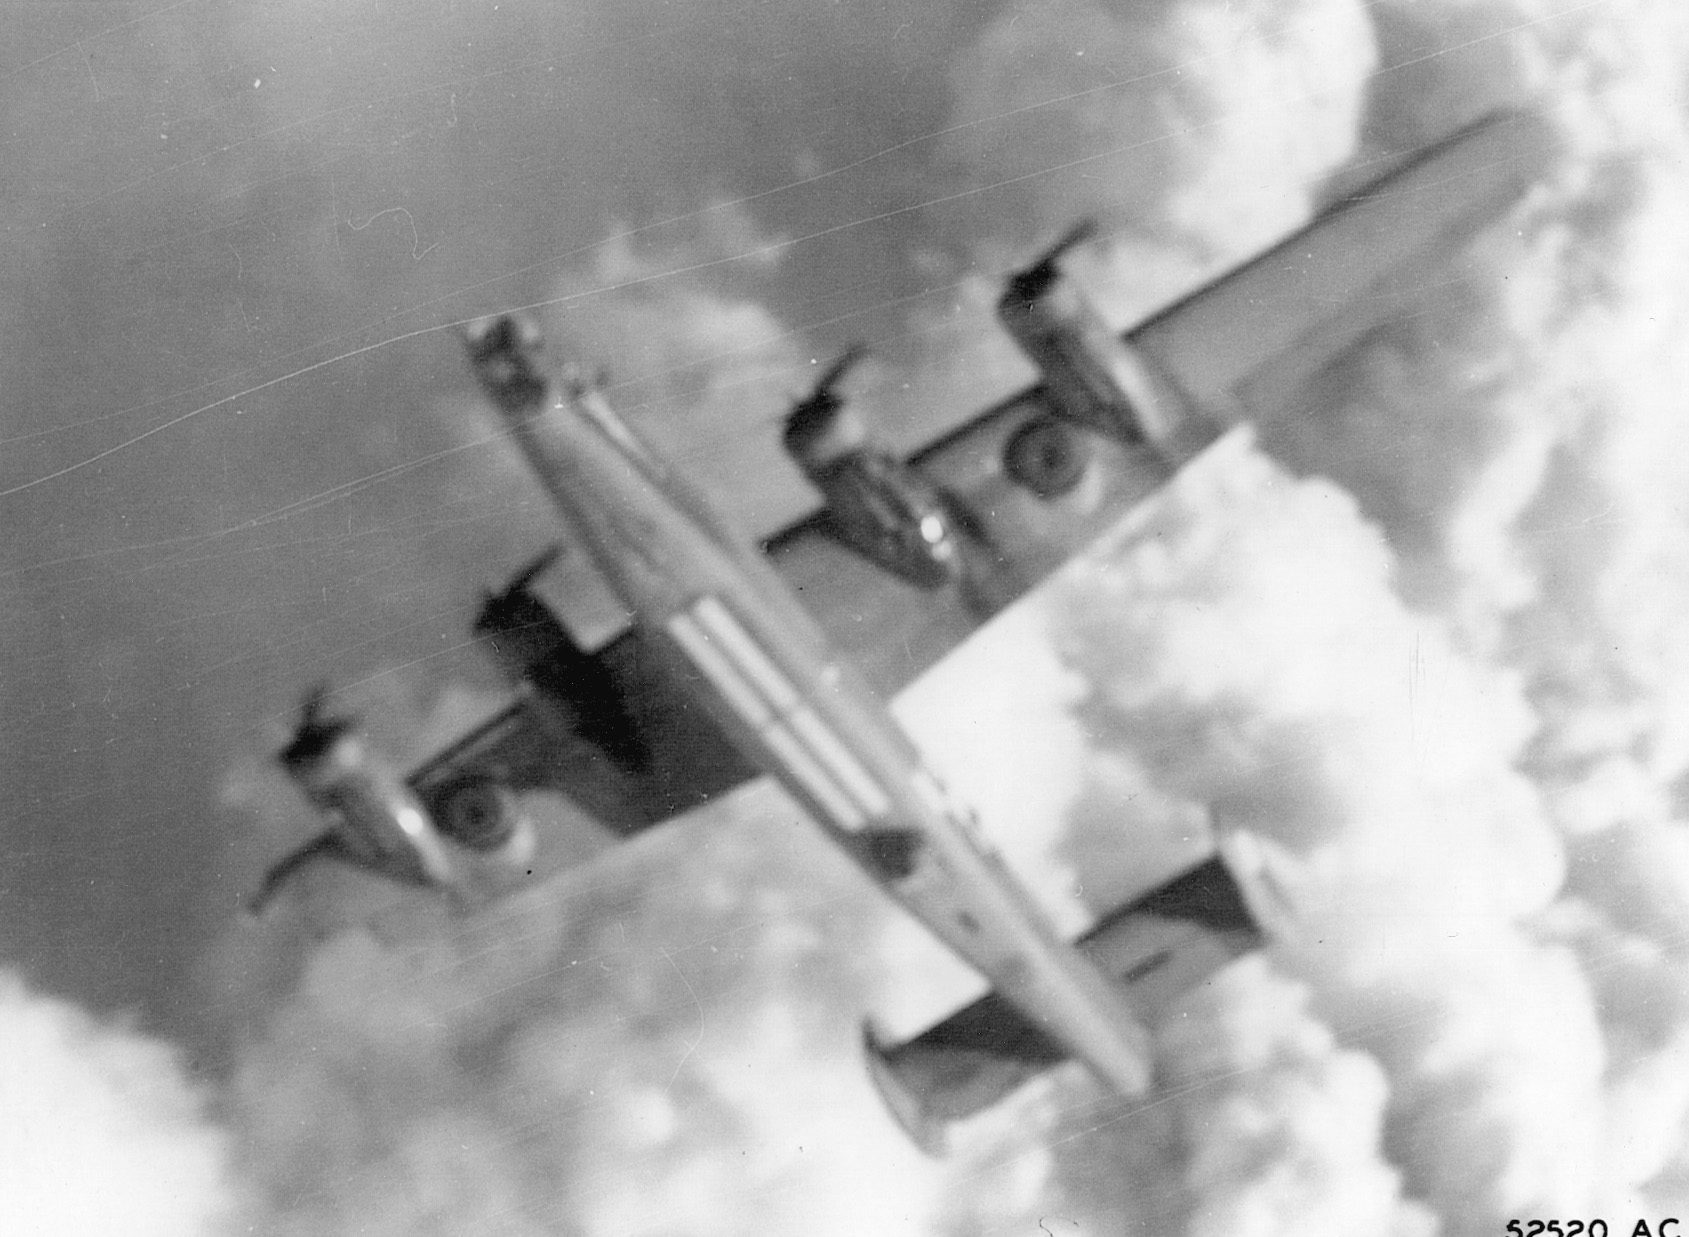 Crippled by intense antiaircraft fire, a B-24 spins out of control and heads earthward during the August 1, 1943, Ploesti attack.